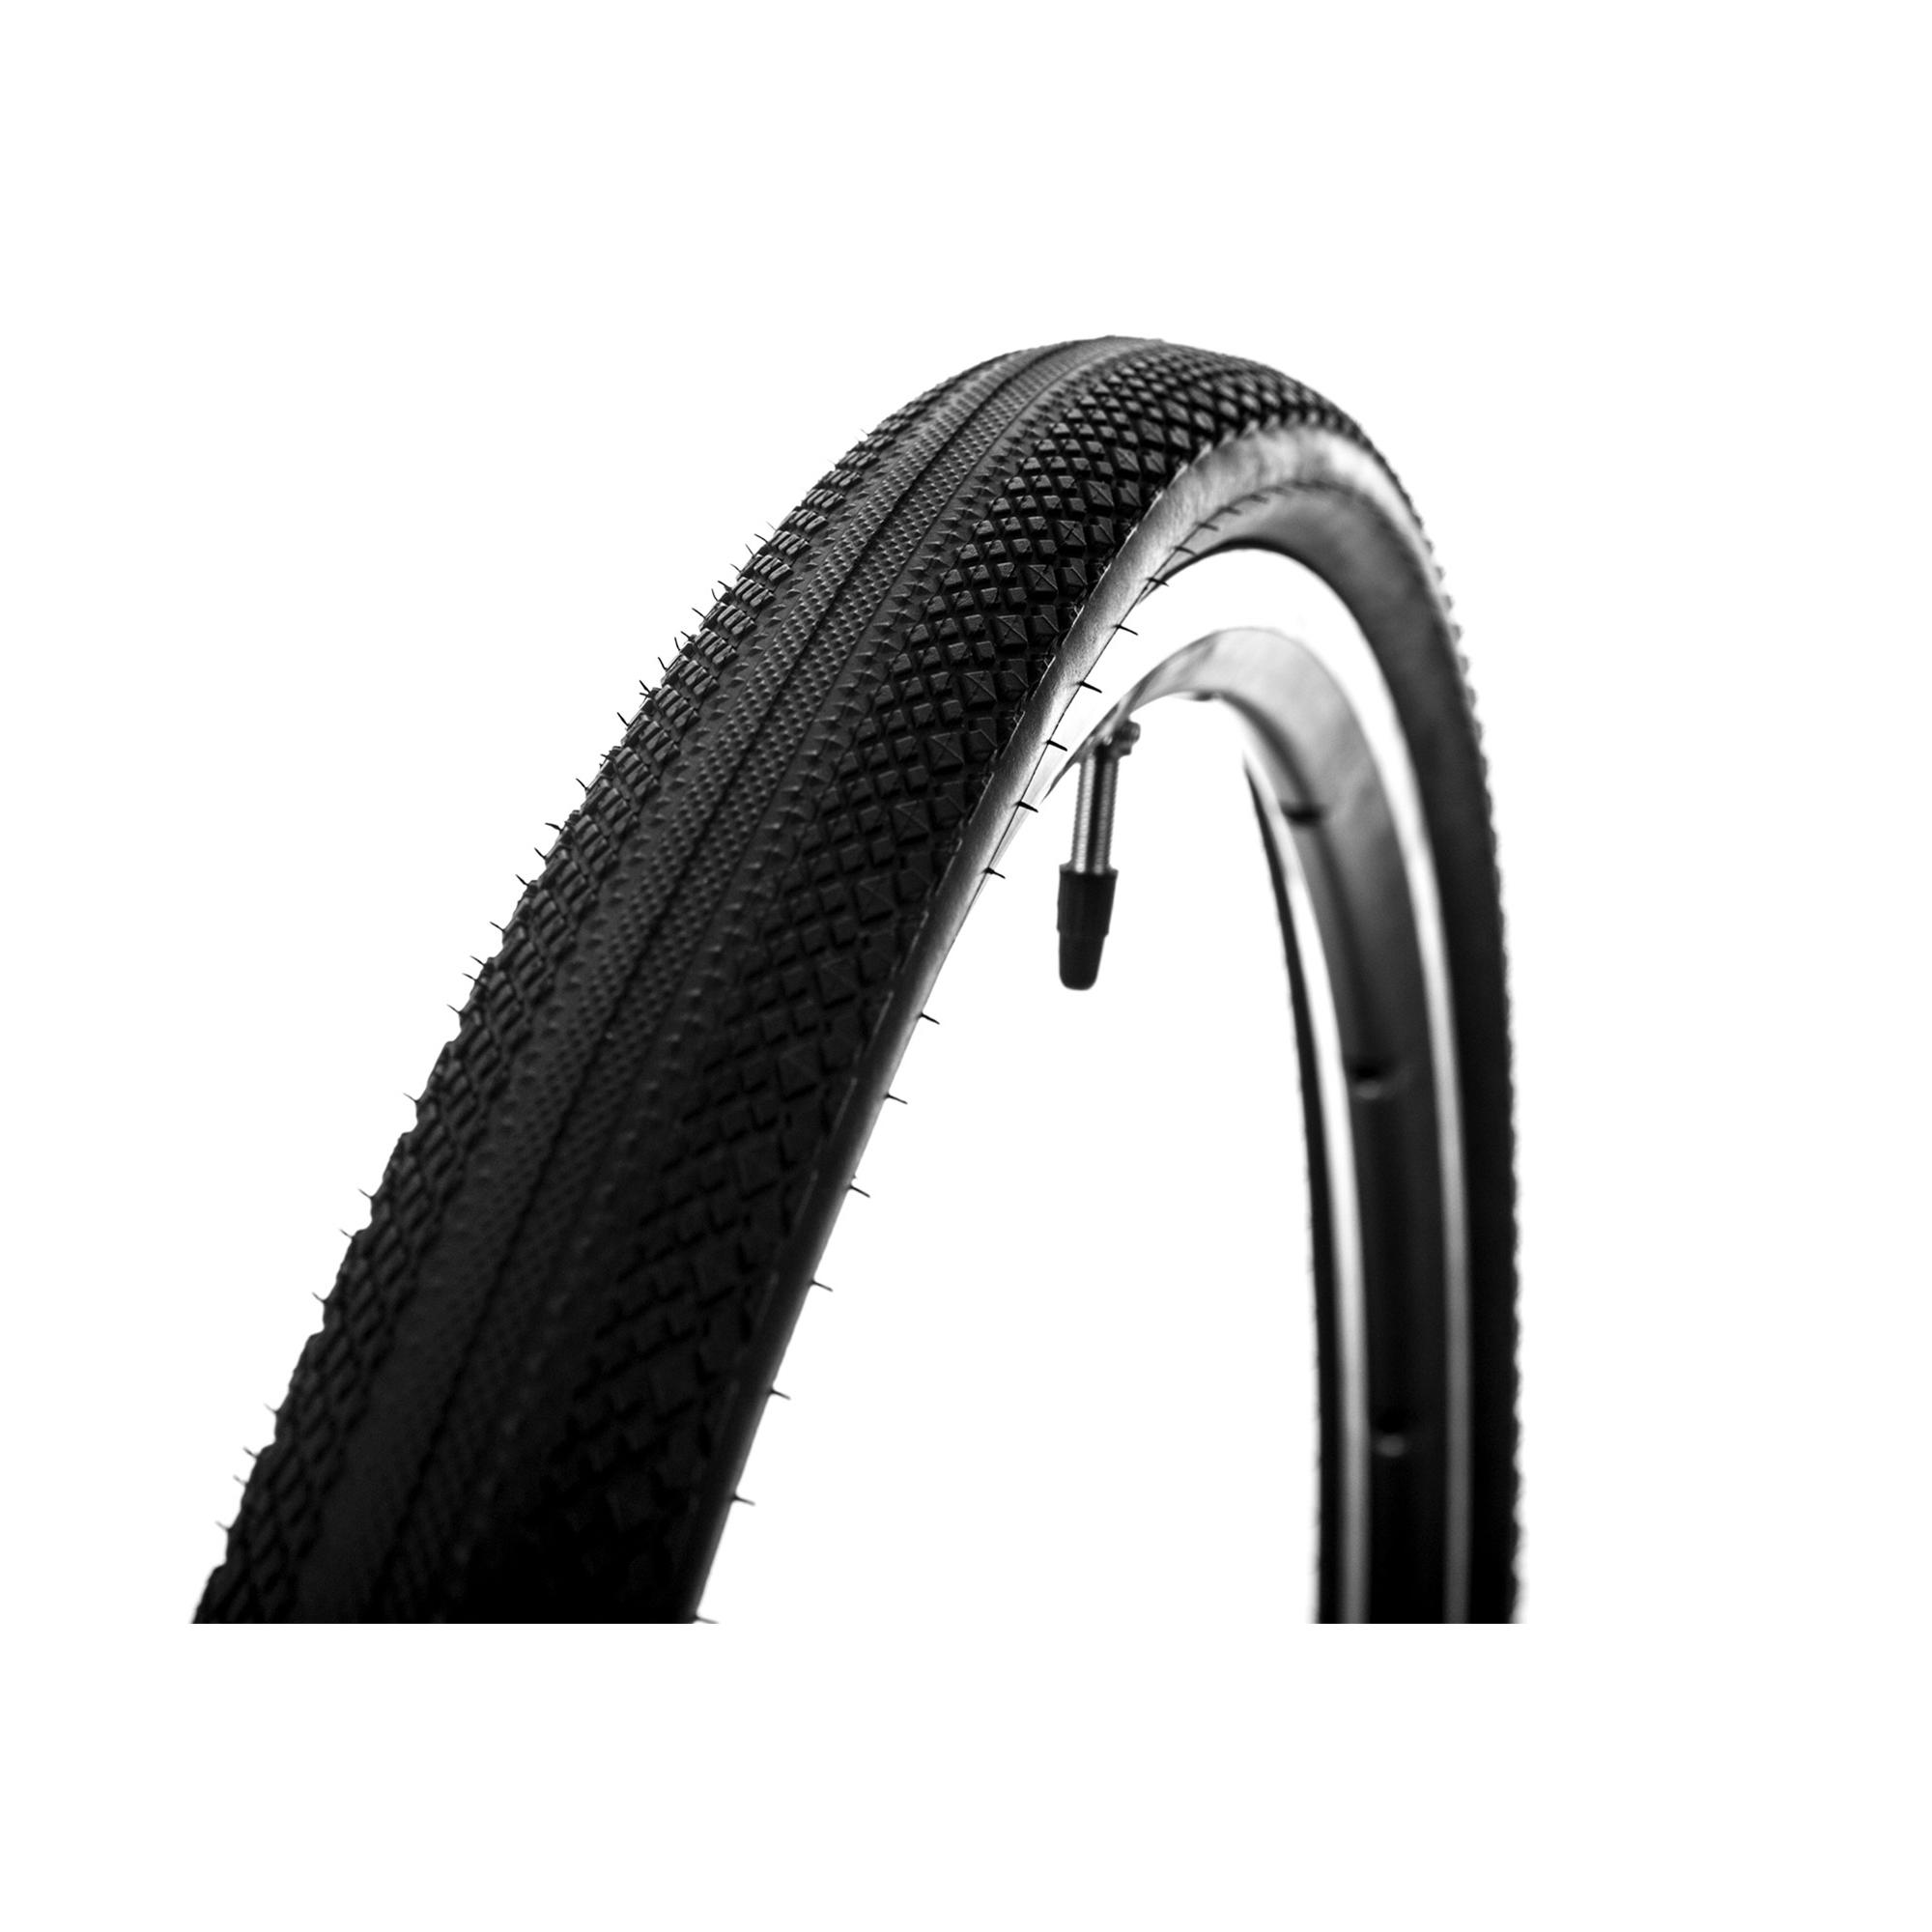 Cauciuc HUTCHINSON OVERIDE TLR 700x35c (tubeless ready)